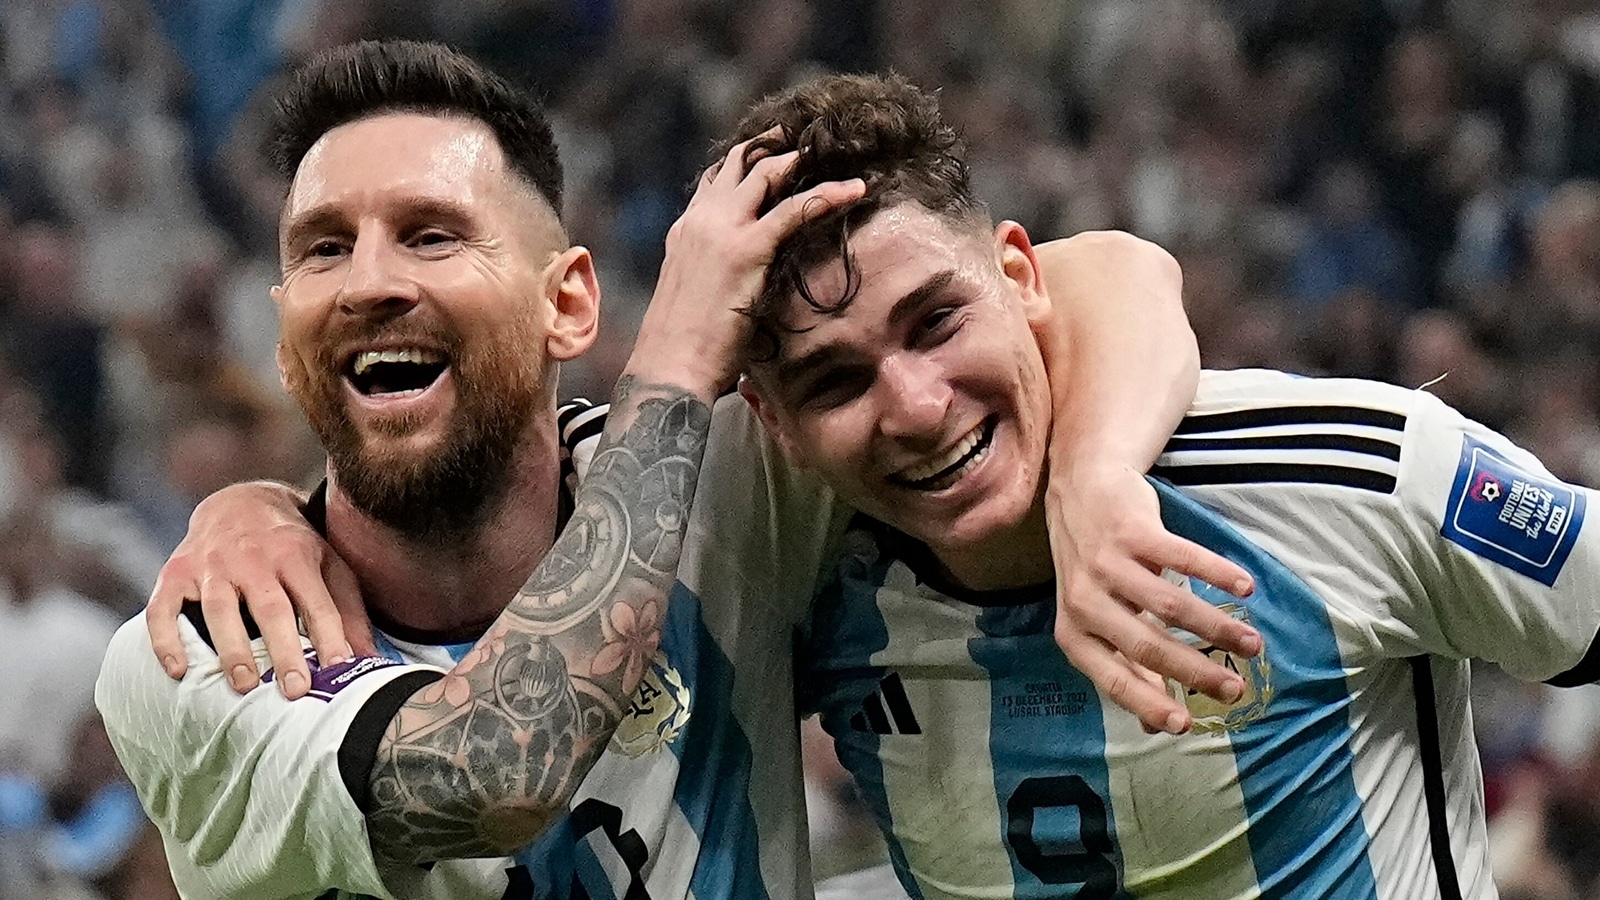 Argentina vs Croatia FIFA World Cup 2022 highlights: Lionel Messi and Co.  thrash Modric-led side 3-0 to enter final | Hindustan Times